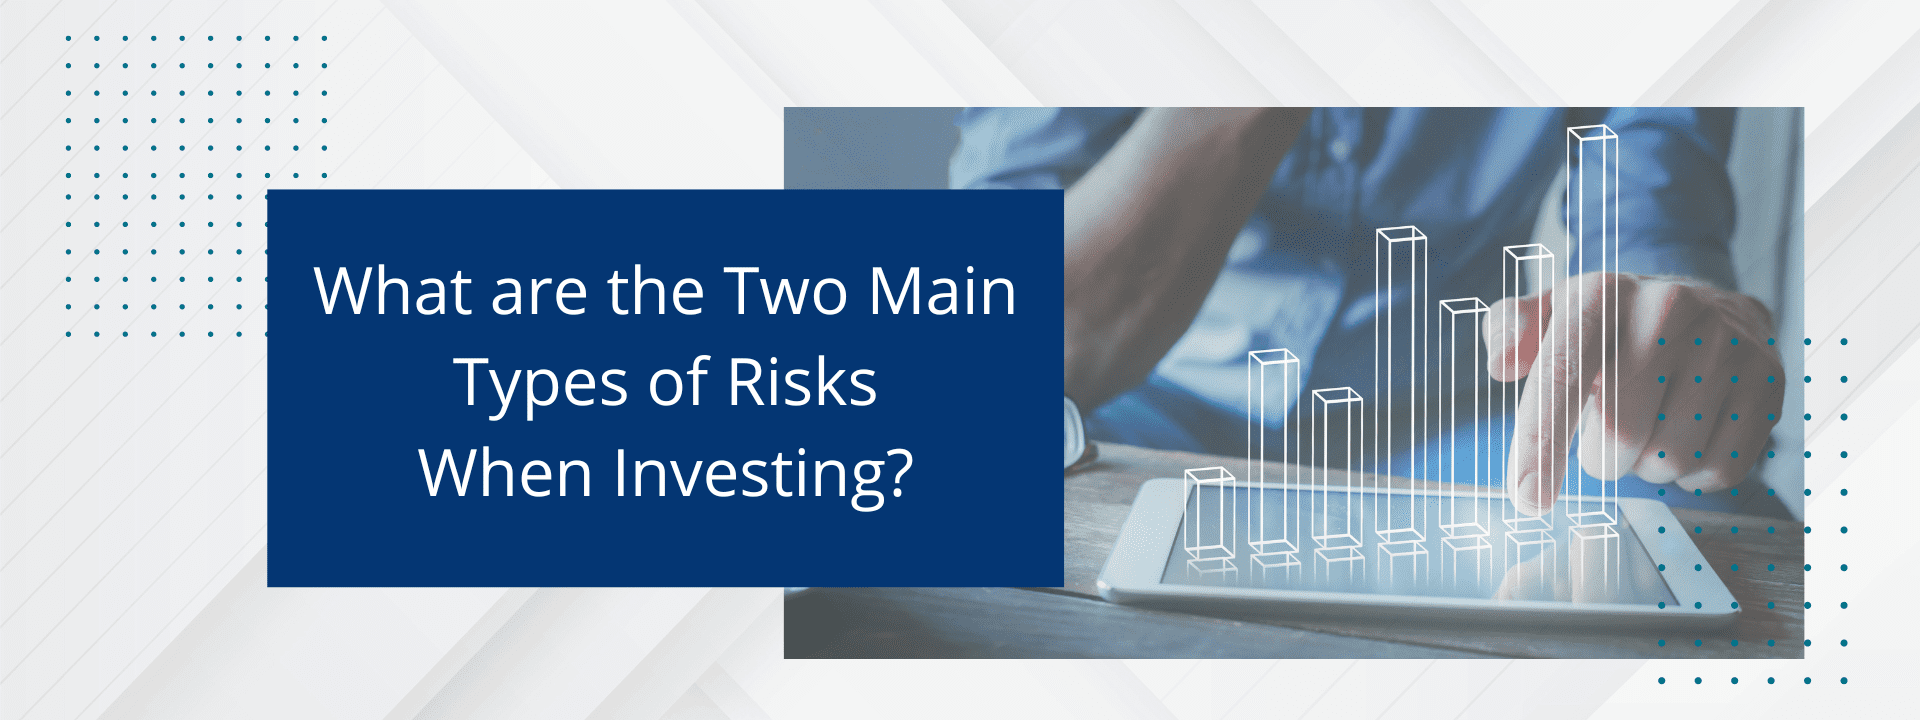 What are the two Main Types of Risks when Investinv?